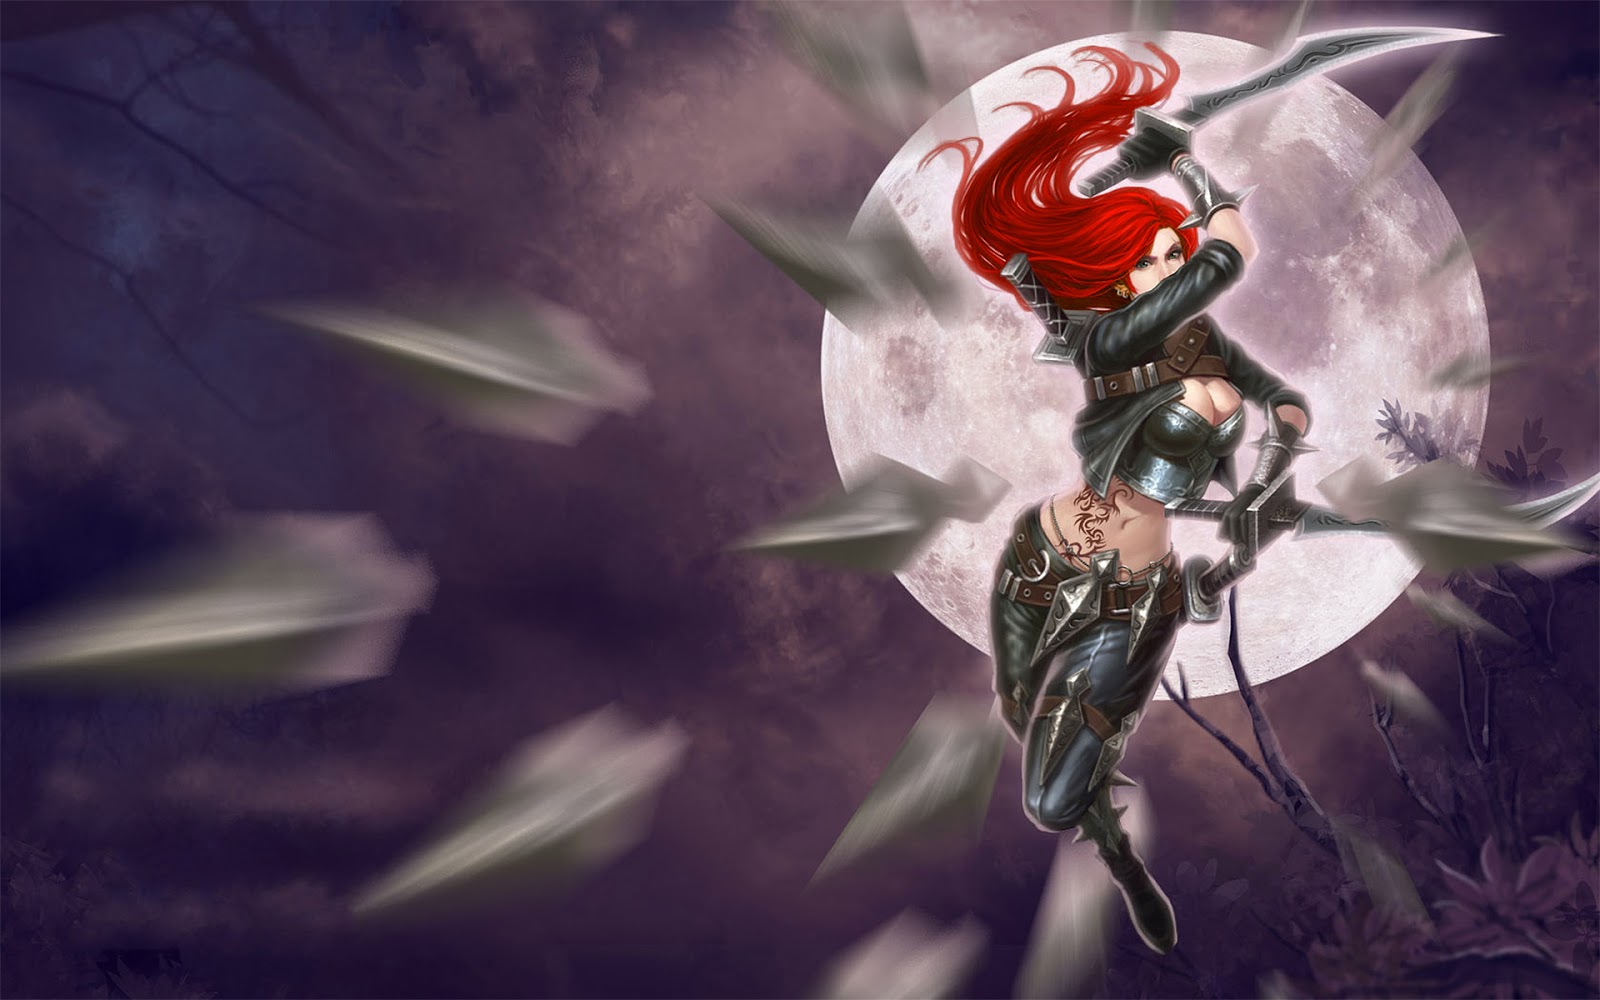 League Of Legends Hd Wallpapers Omg My Favorite Mid Laner Katarina~ Meow